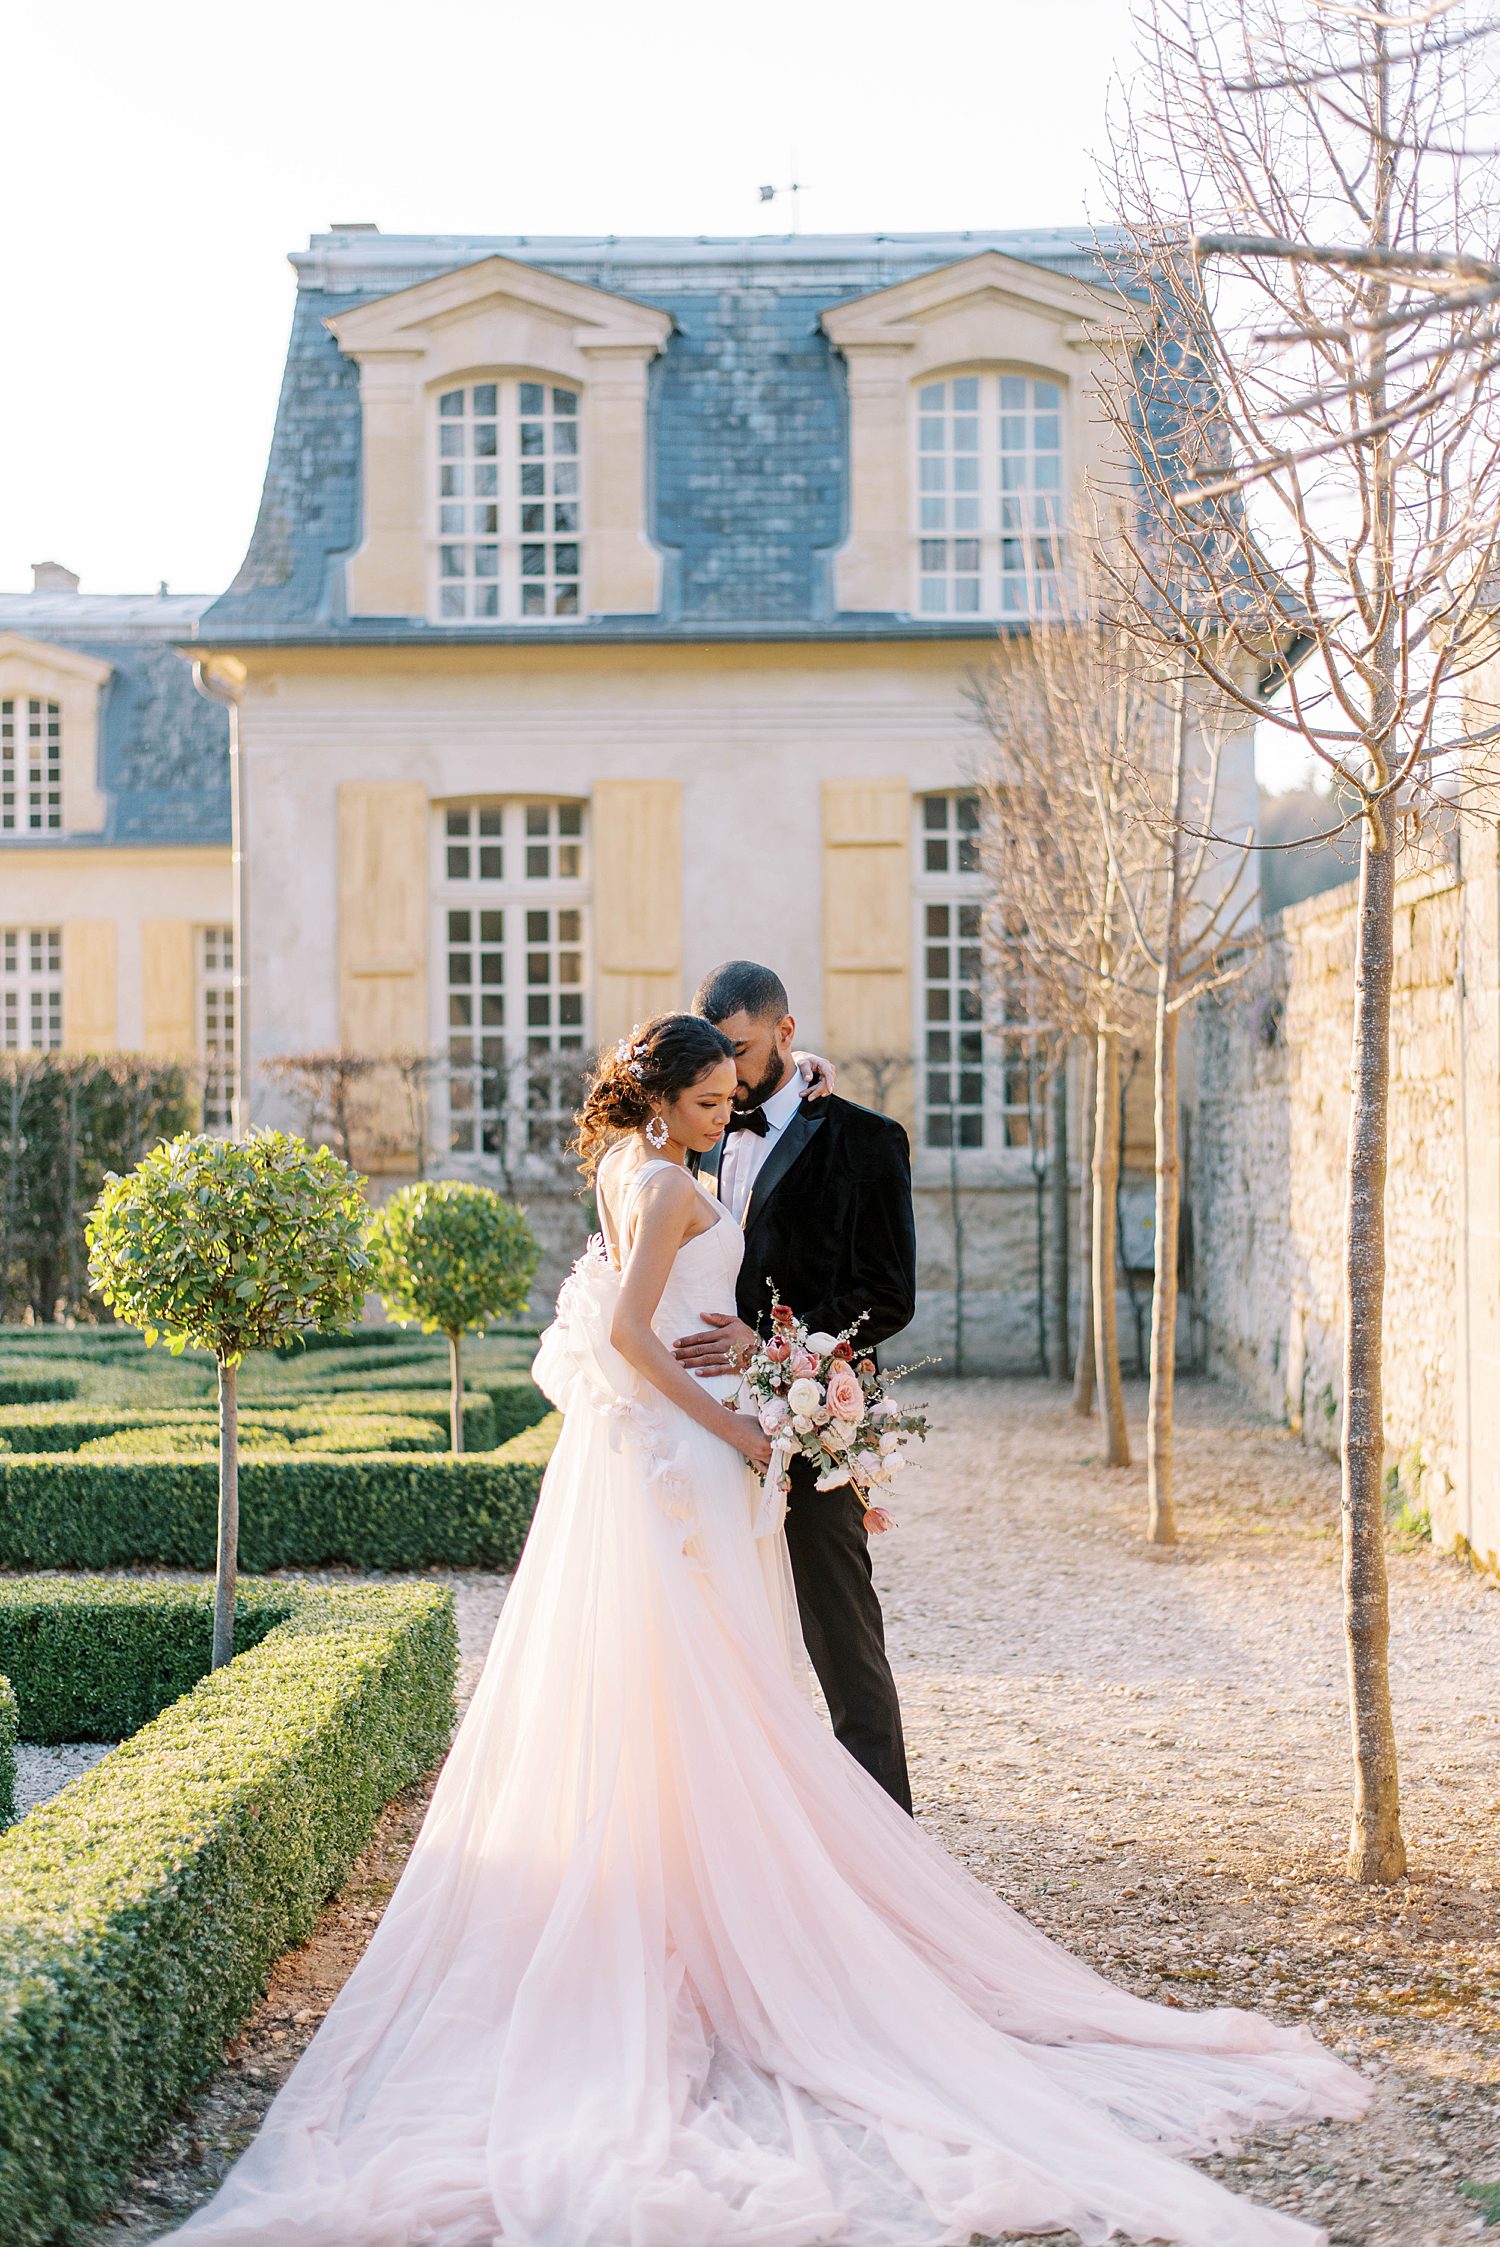 bride and groom hug with bride's blush train around them on path outside Chateau de Villette